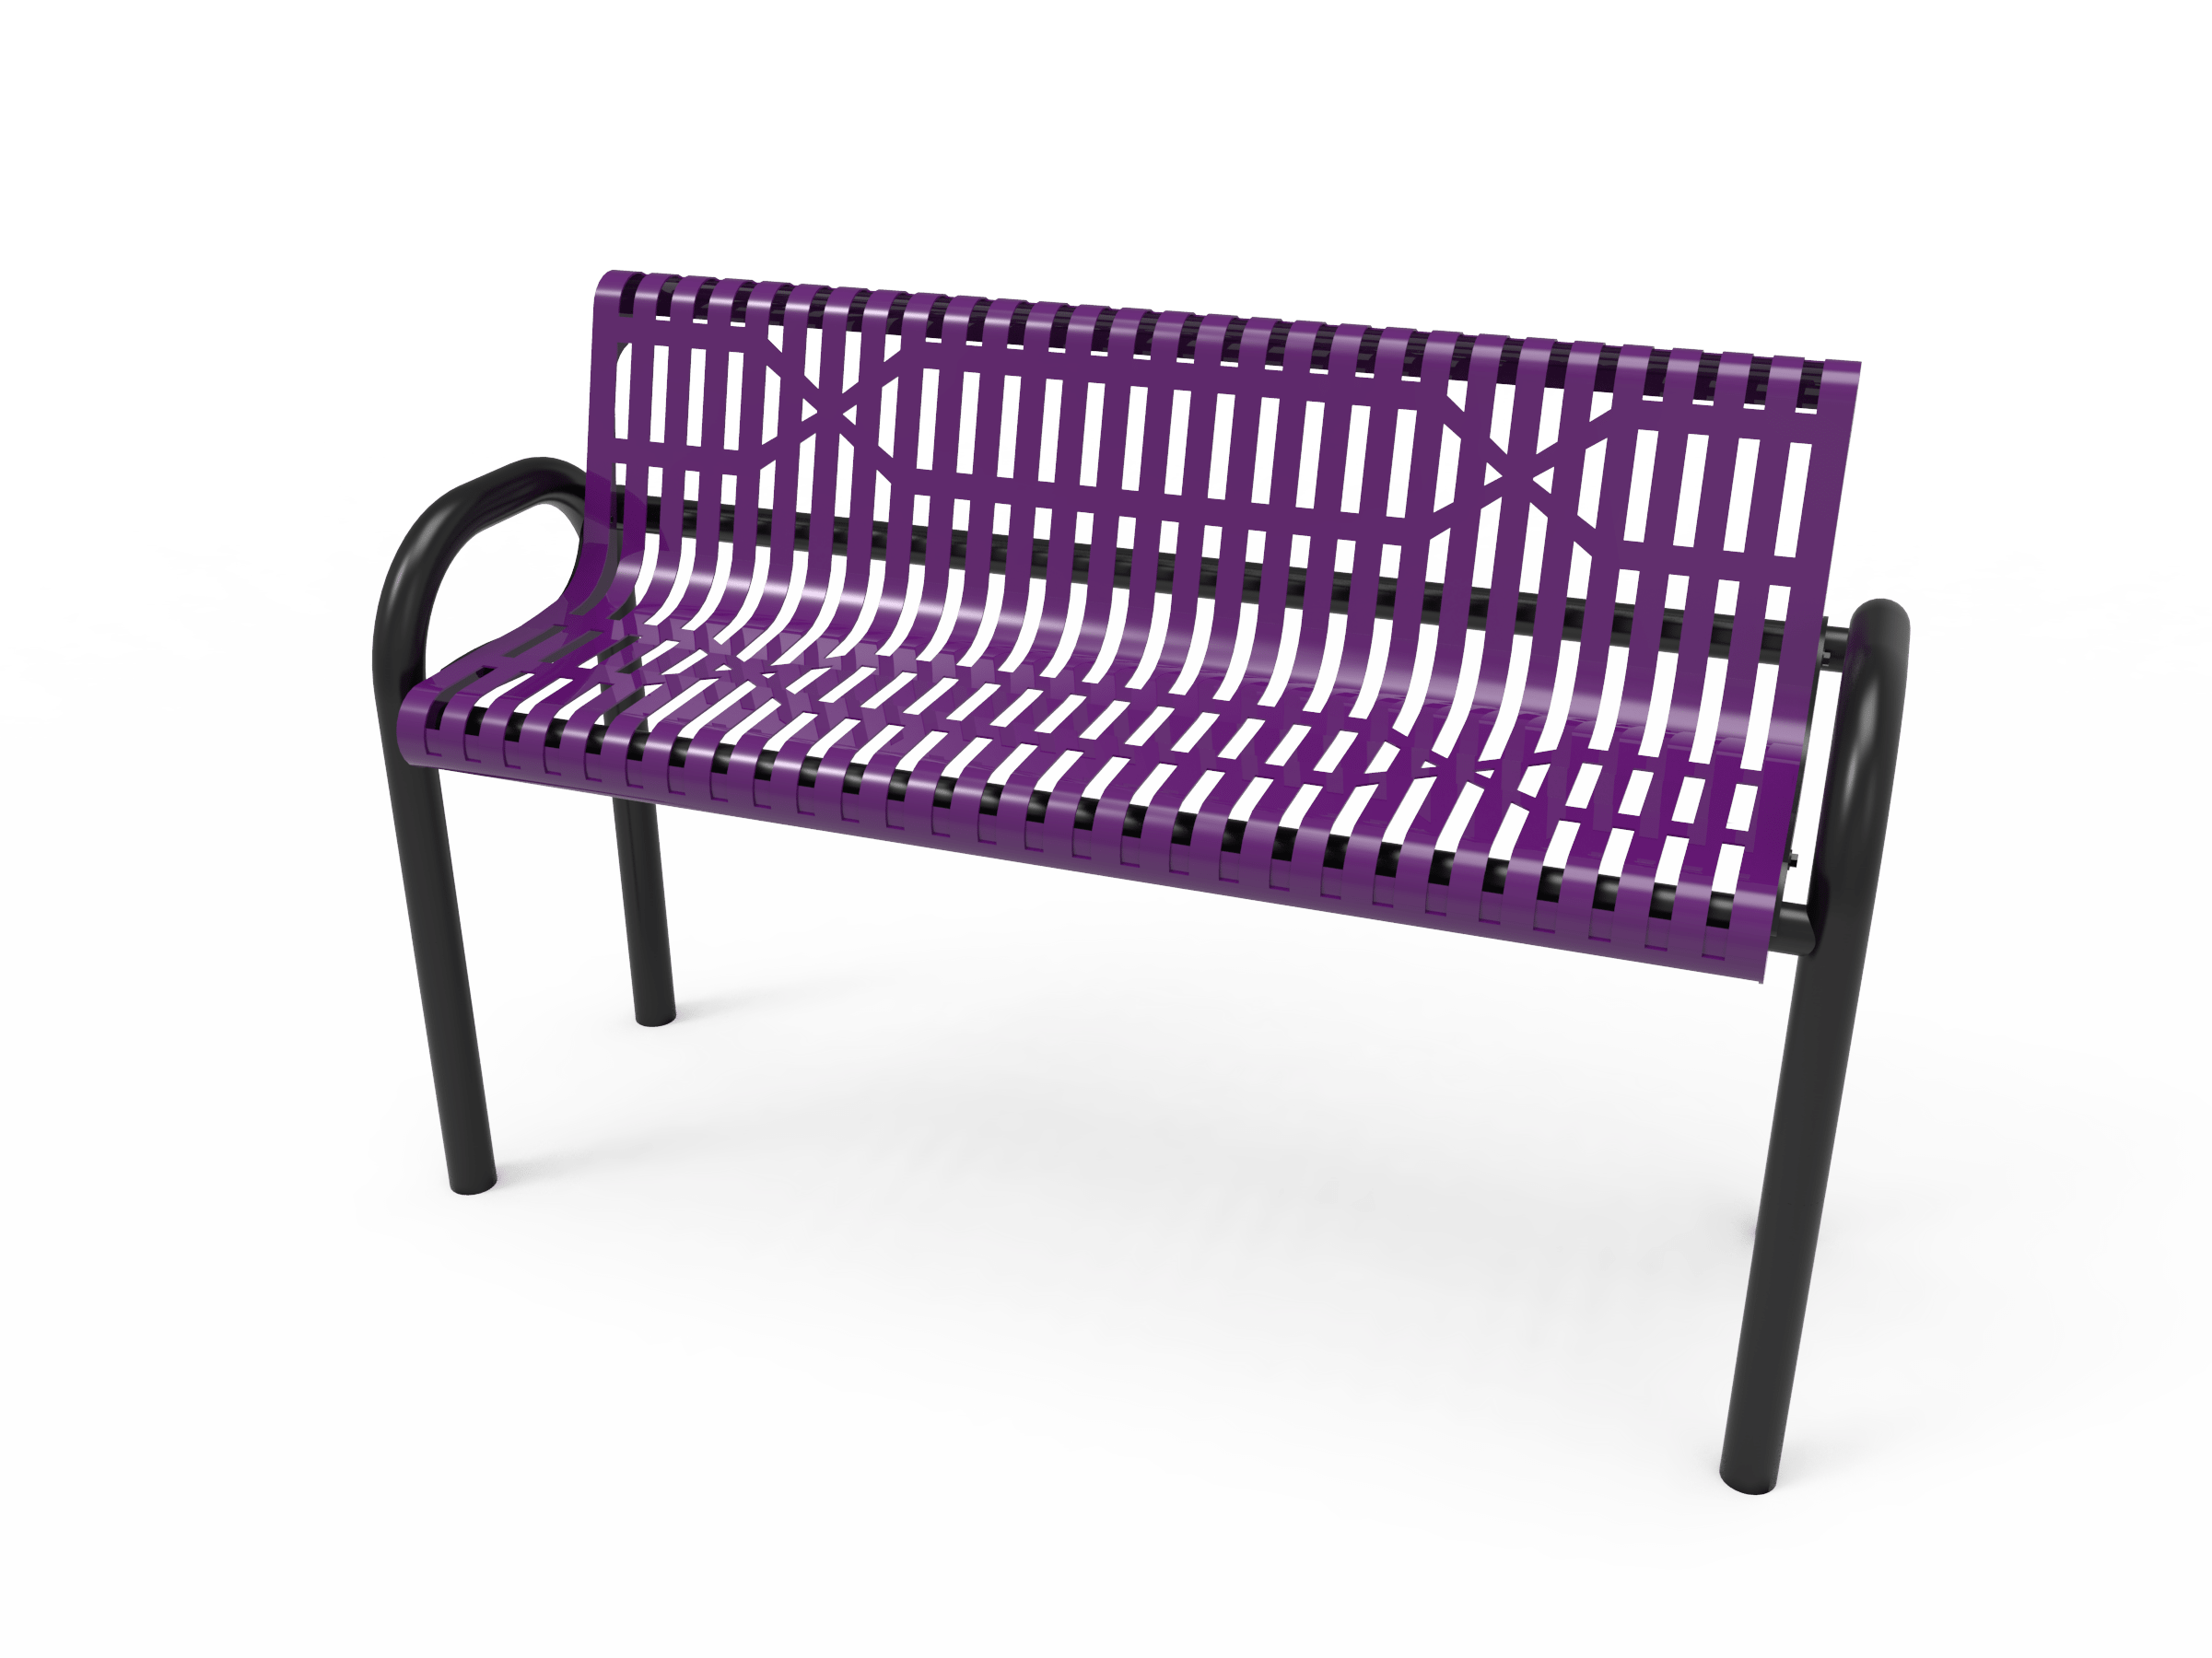 4′ Bench With Back In Ground-Slat
BMD04-F-53-000
Industry Standard Finish
$1179.00
BMD04-E-53-000
Advantage Premium Finish
$1469.00
